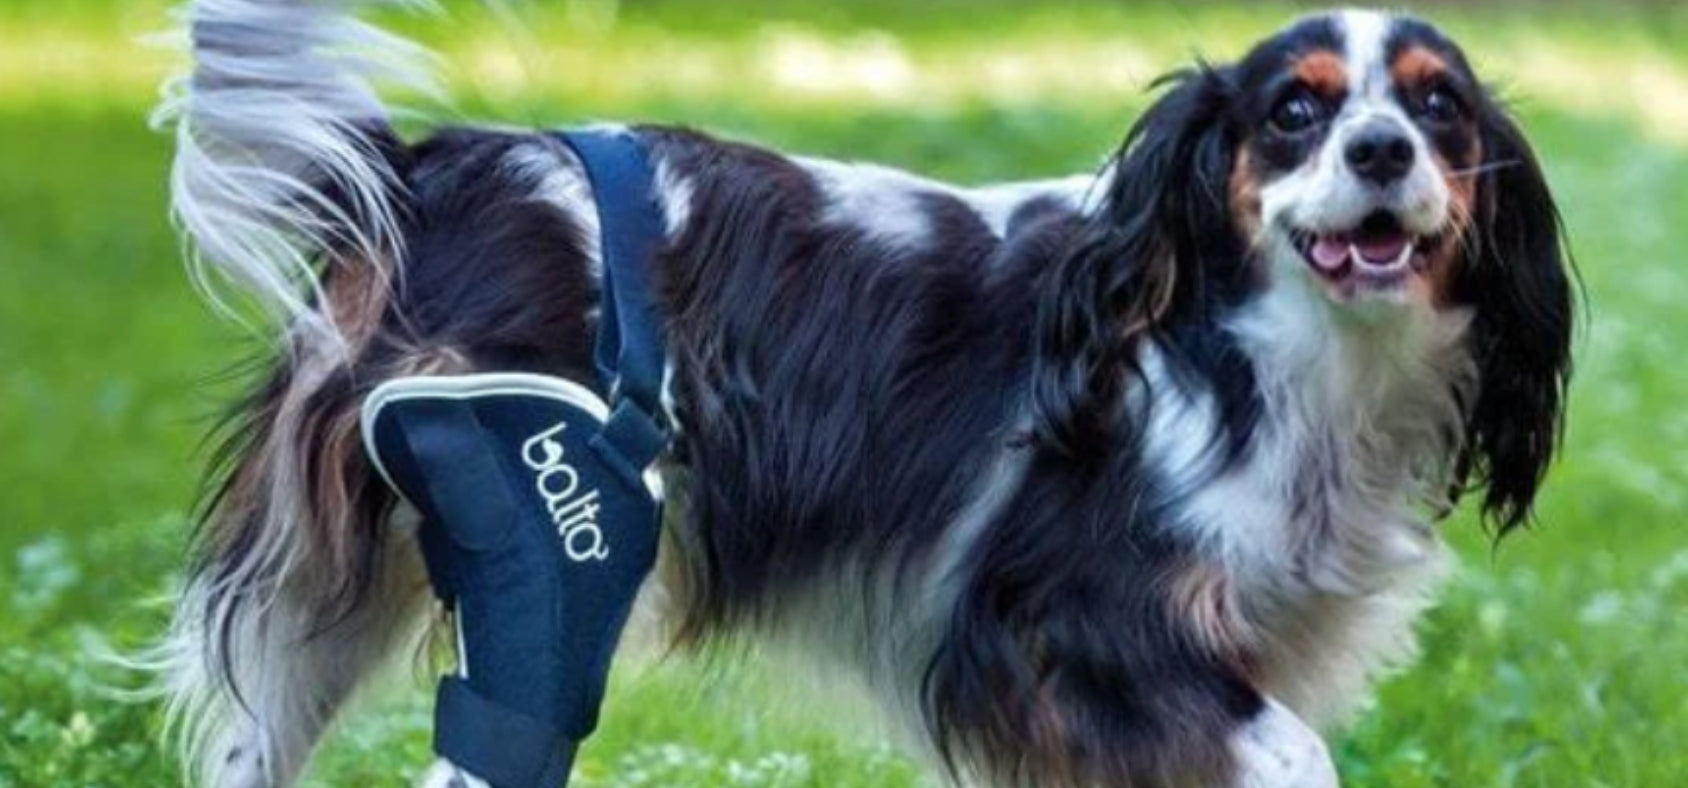 Cruciate Knee Braces For Dogs